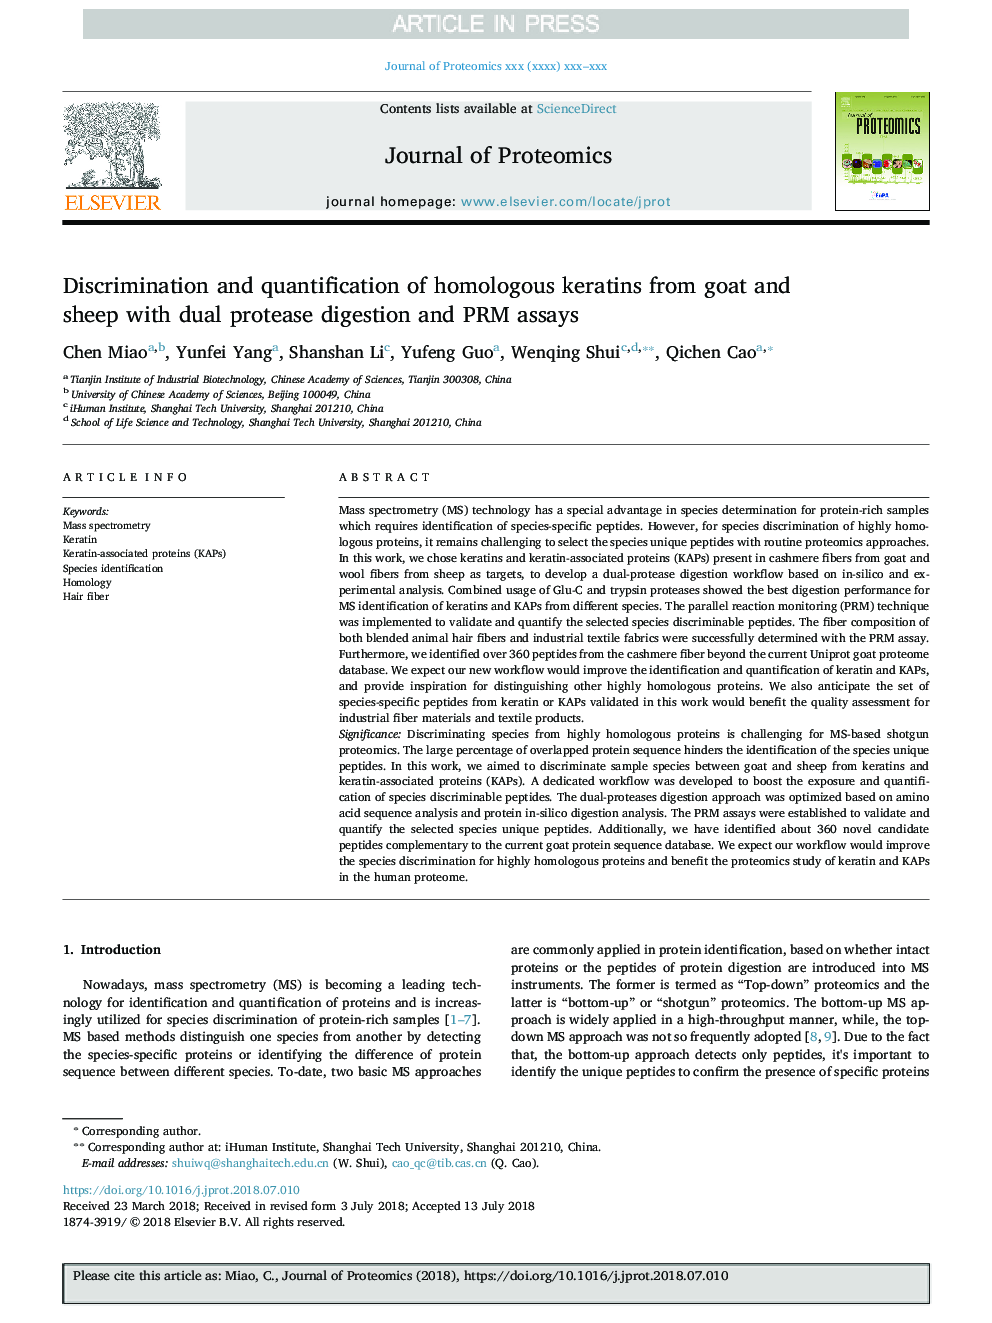 Discrimination and quantification of homologous keratins from goat and sheep with dual protease digestion and PRM assays